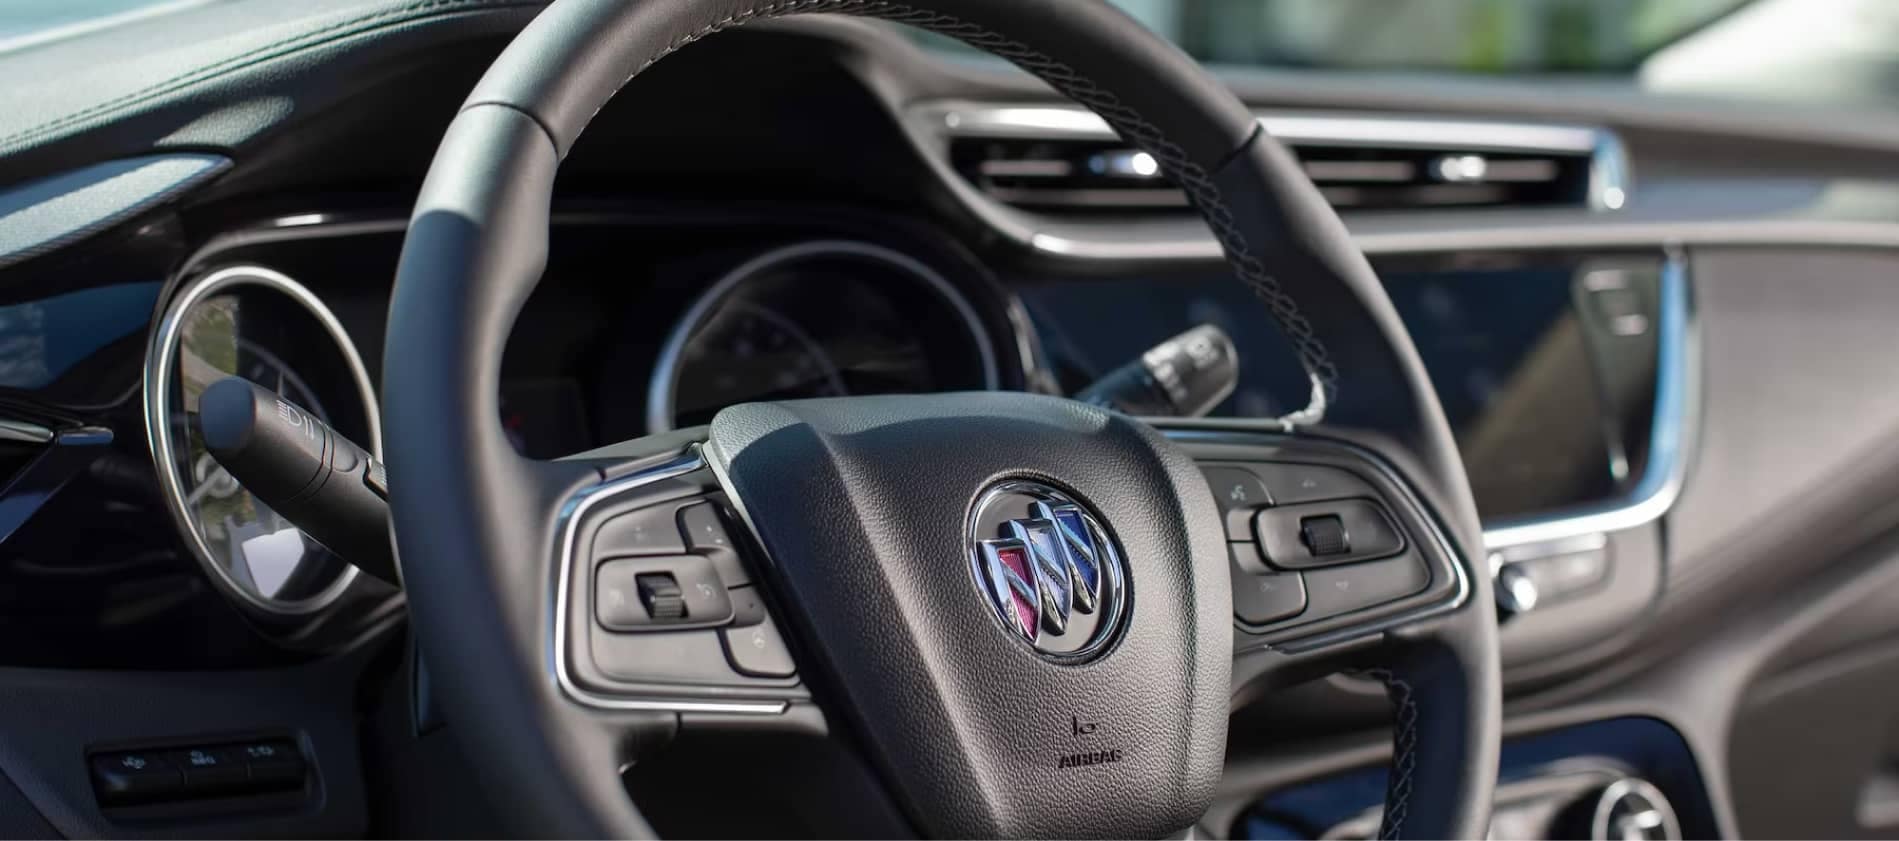 Interior of a Buick vehicle